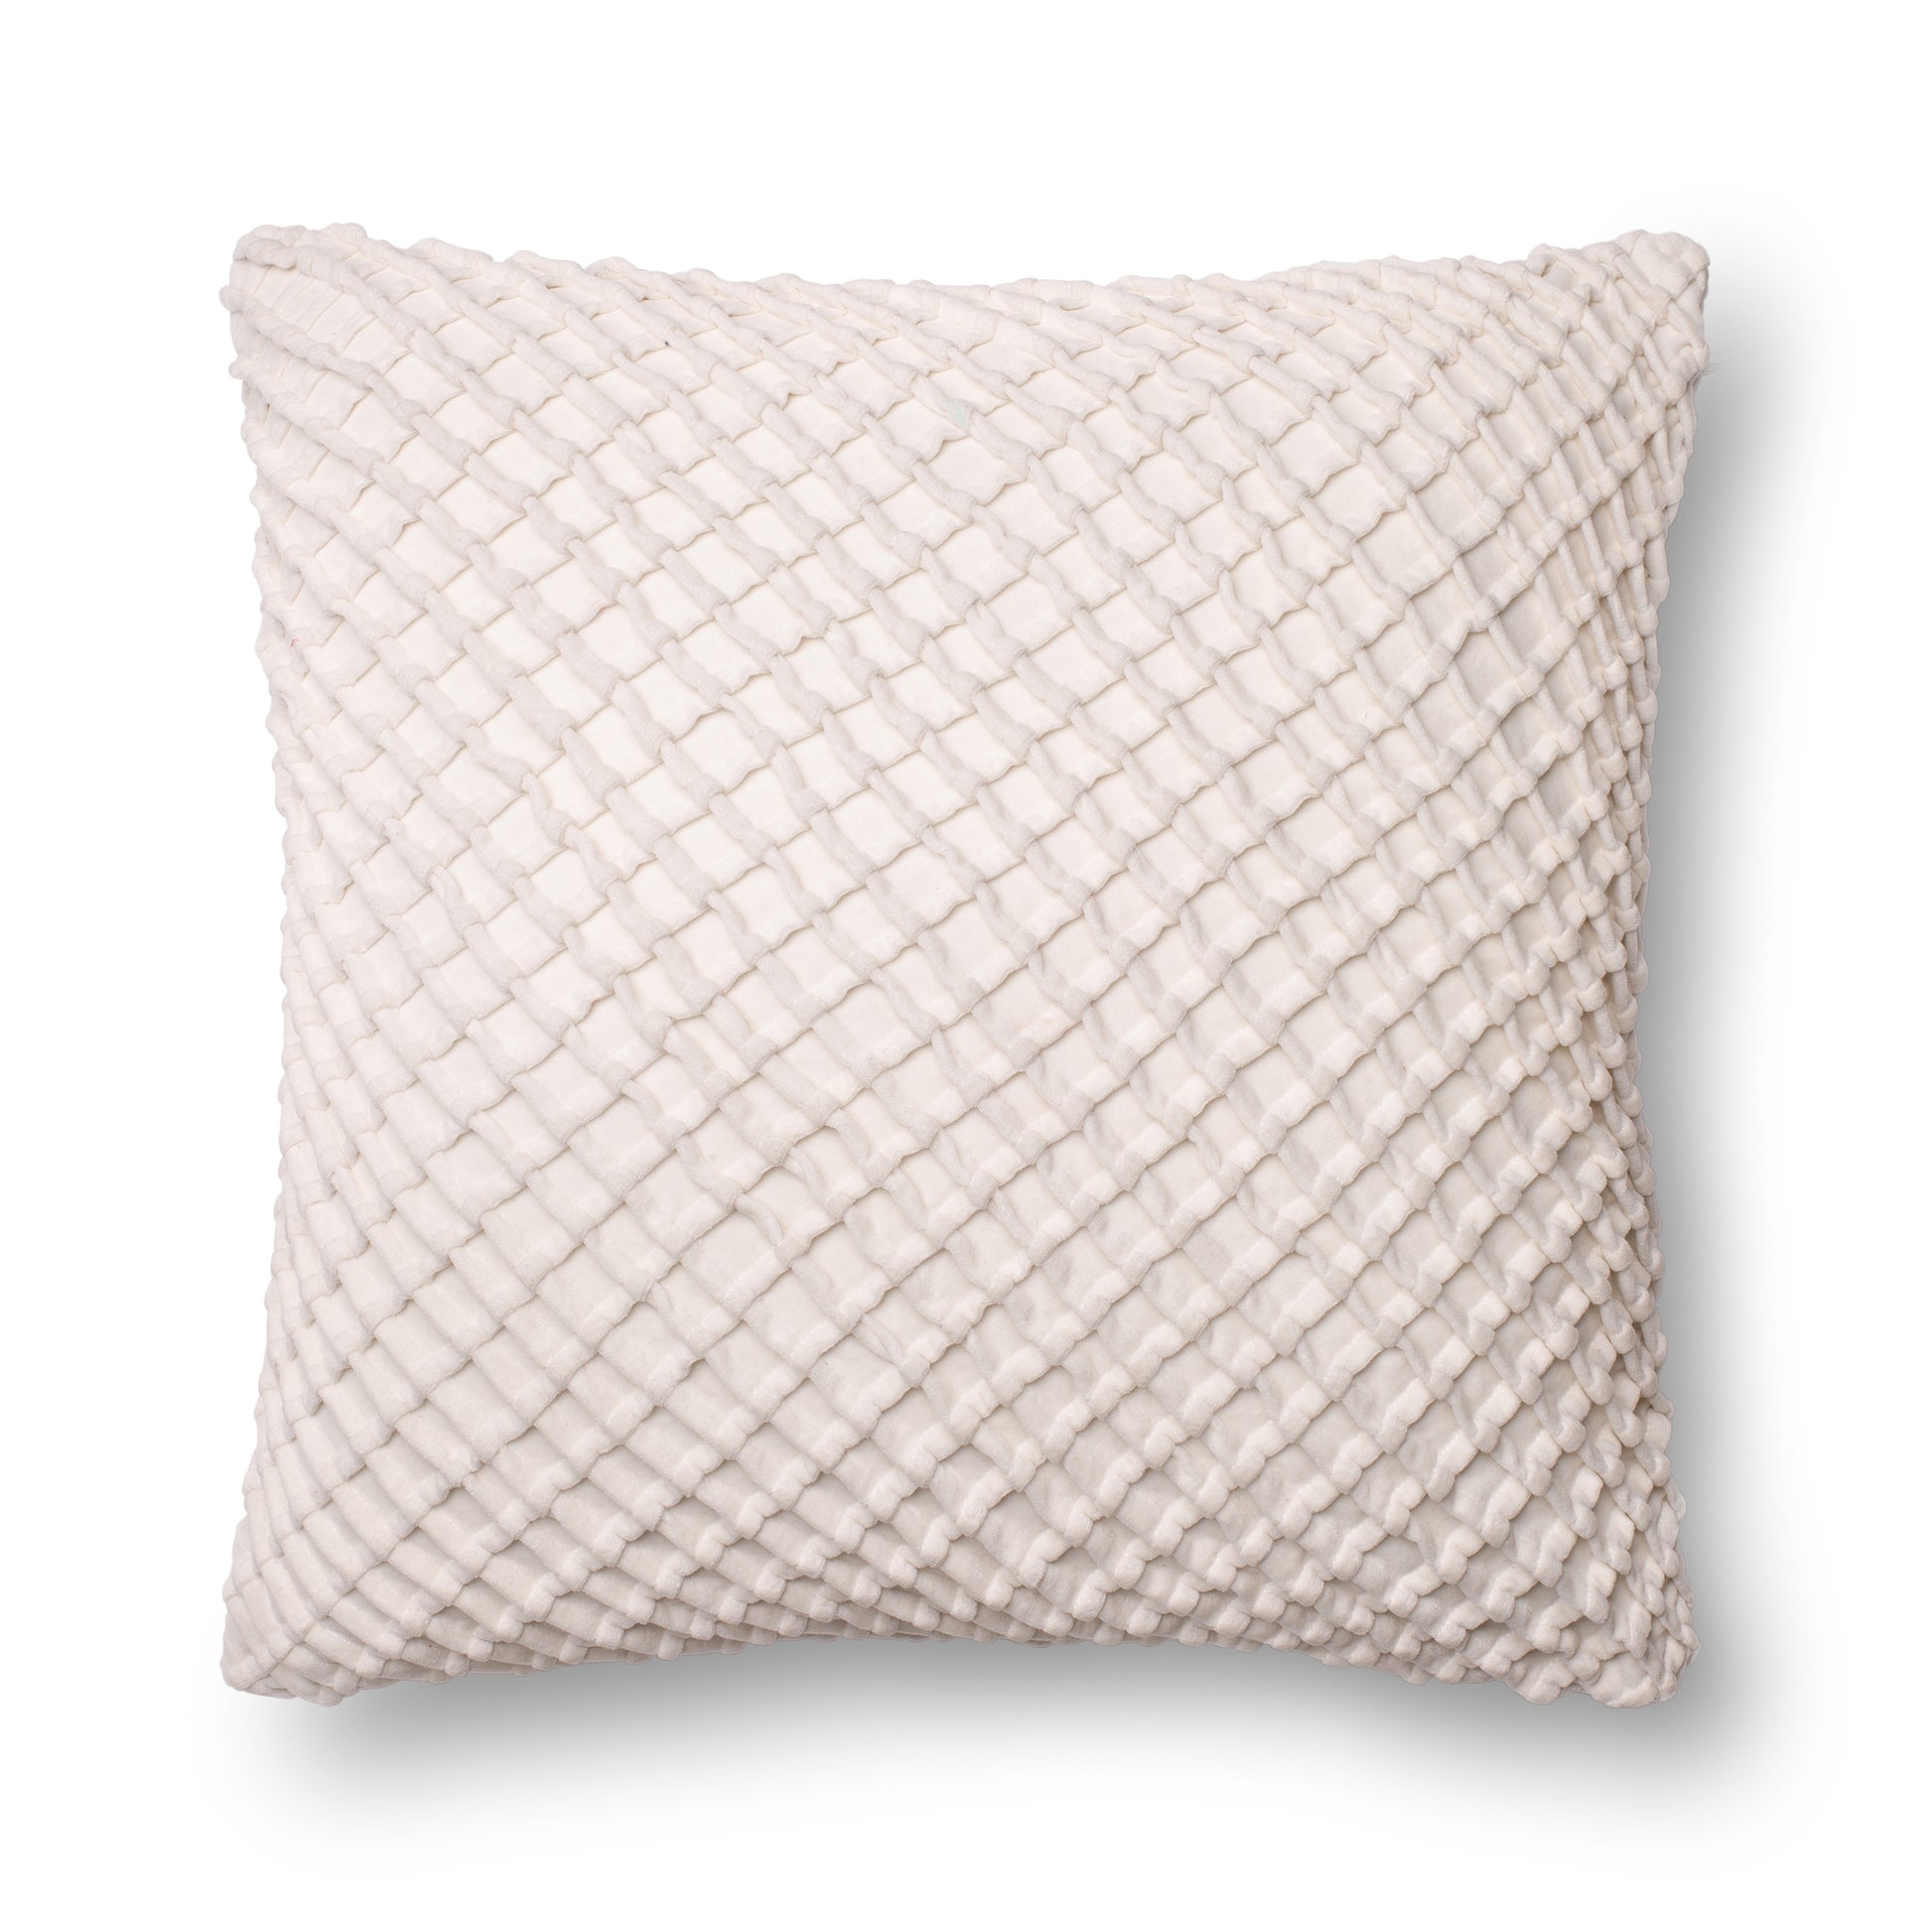 Photo of a pillow;  P0125 White 22" x 22" Cover w/Poly Pillow